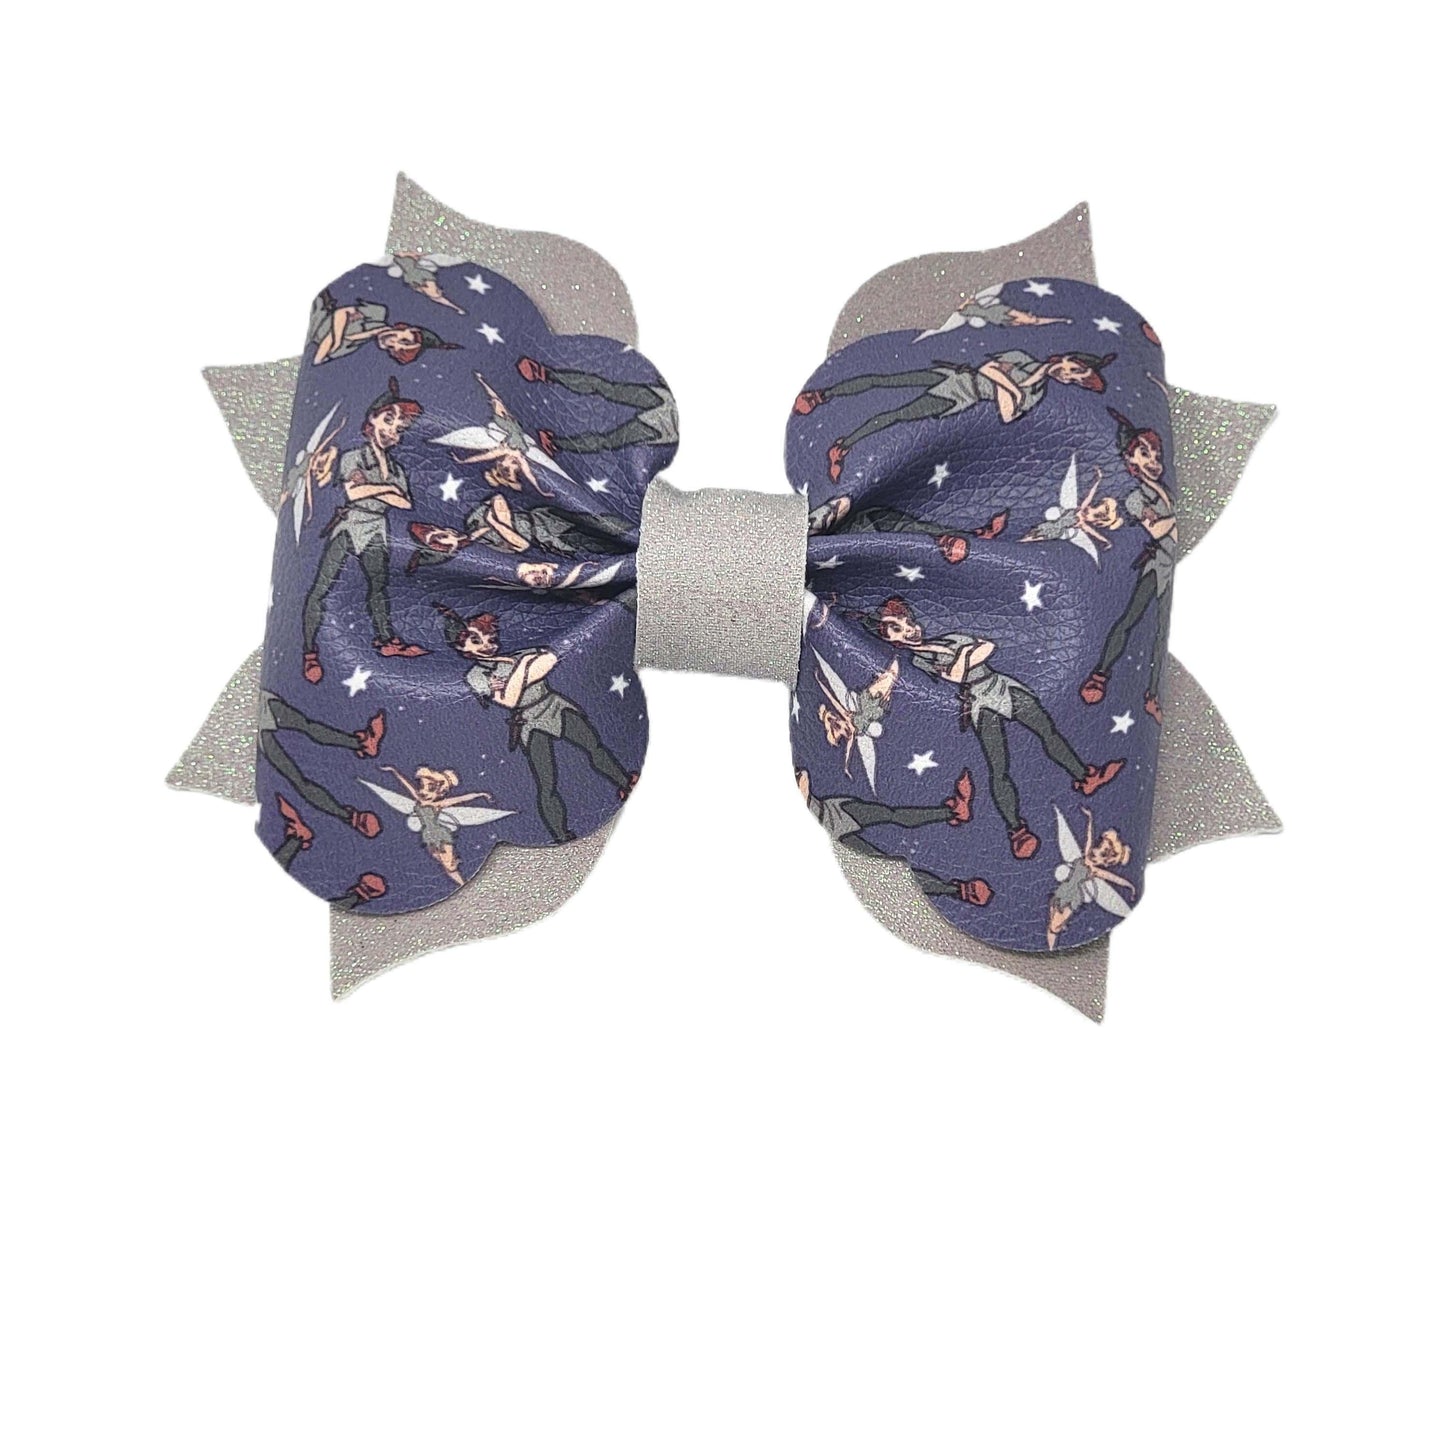 Peter & Tink Poppy Bow 6" 